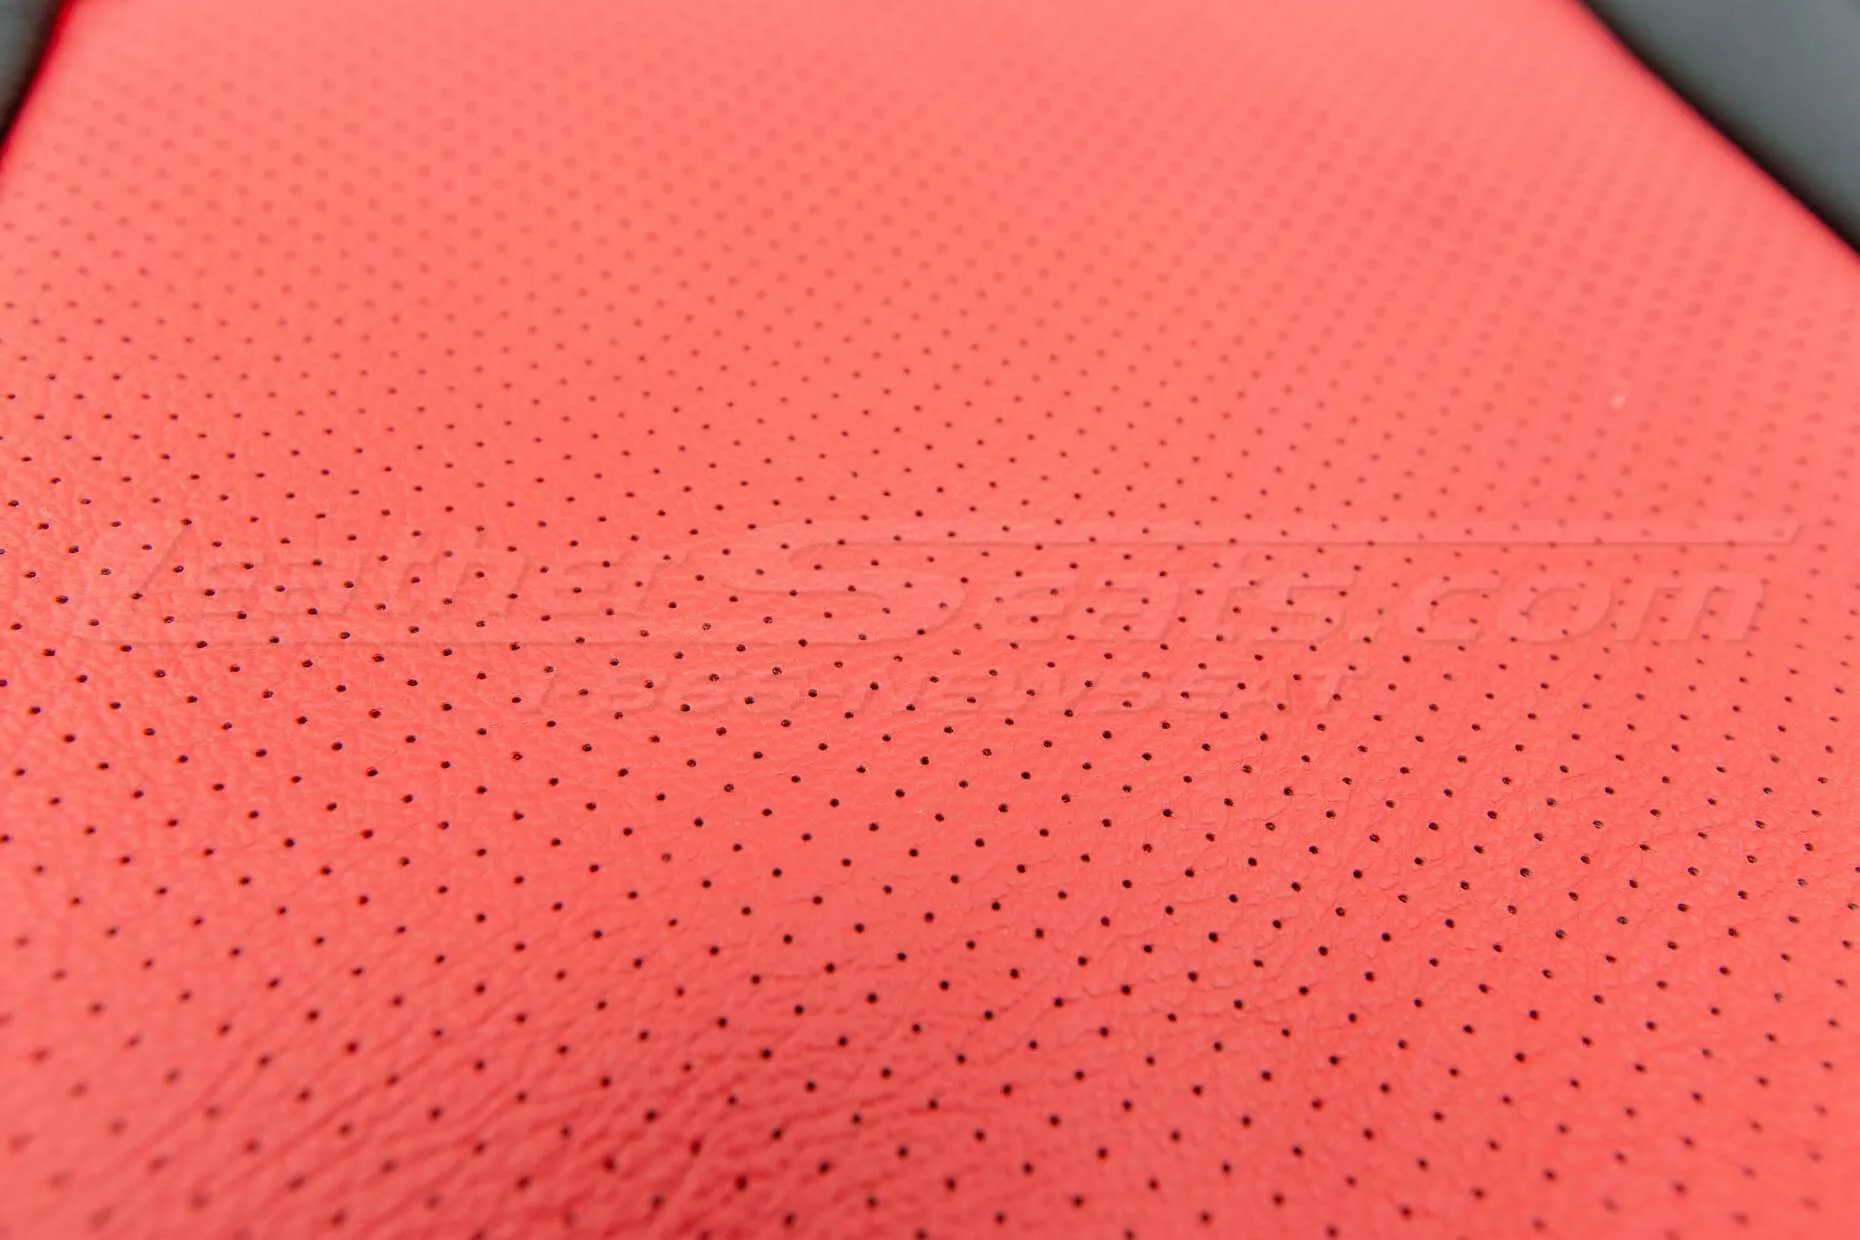 Bright Red Perforation close-up